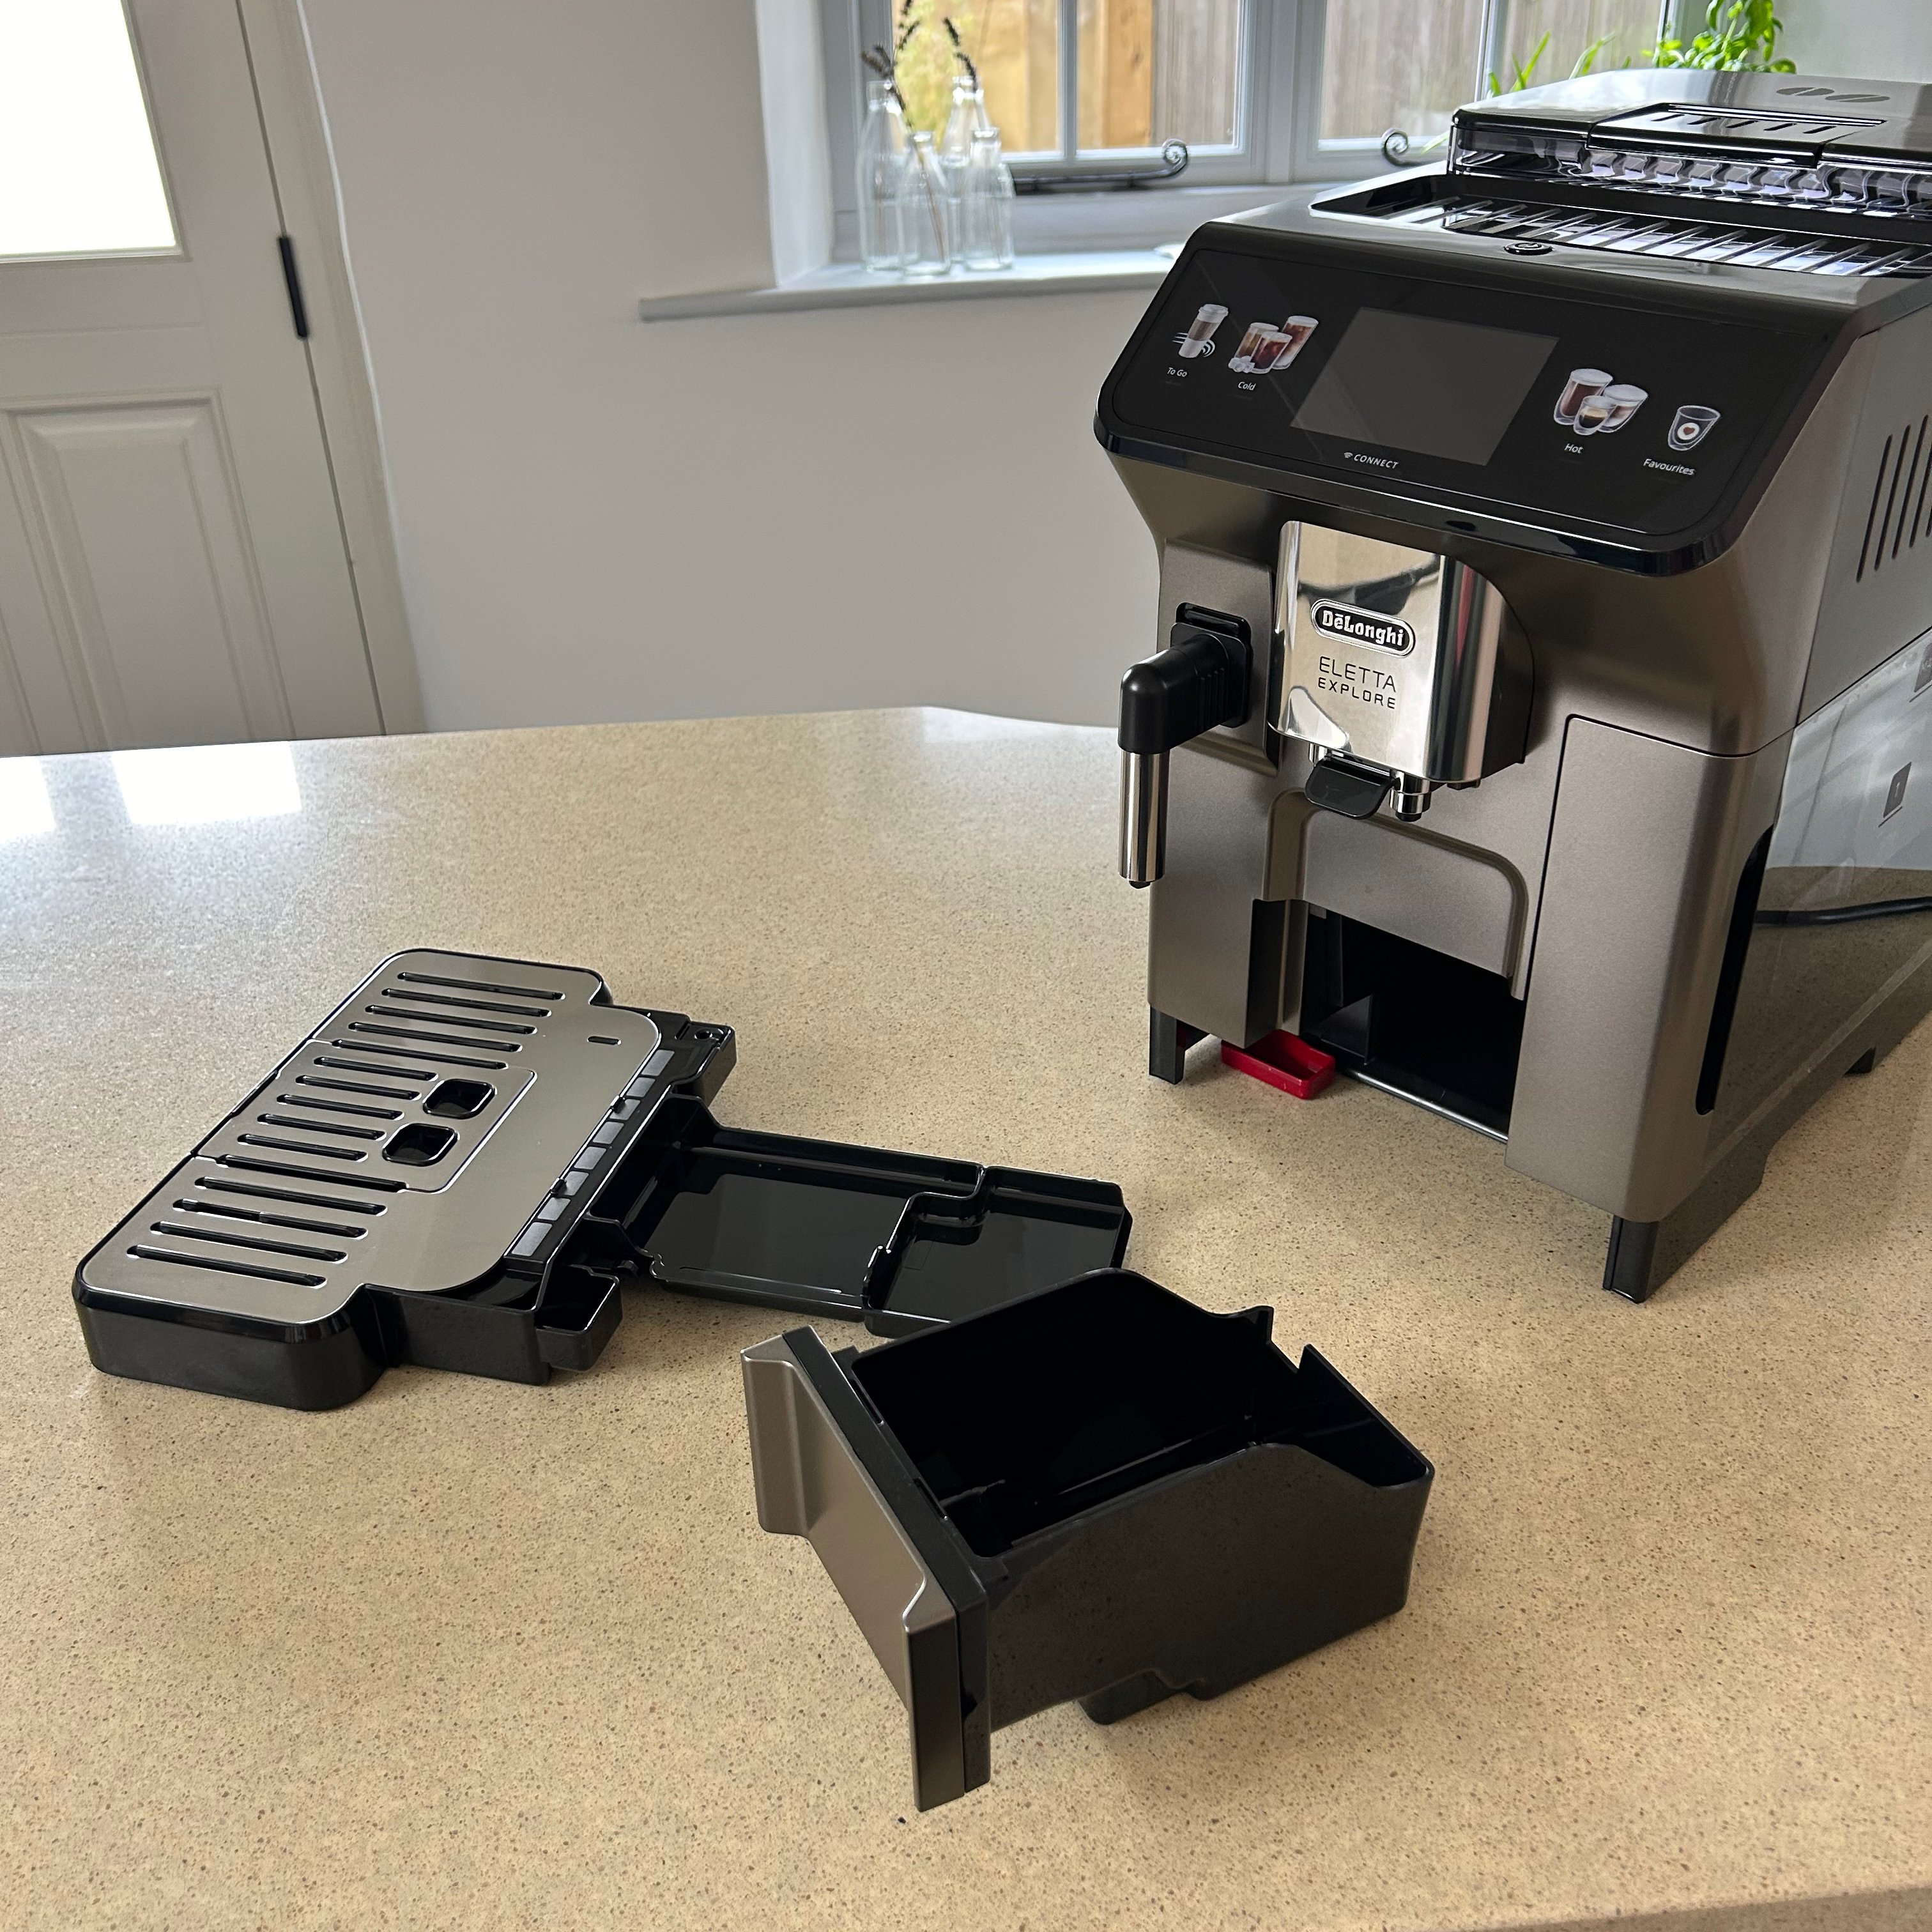 De'Longhi bean to cup coffee machine testing at home